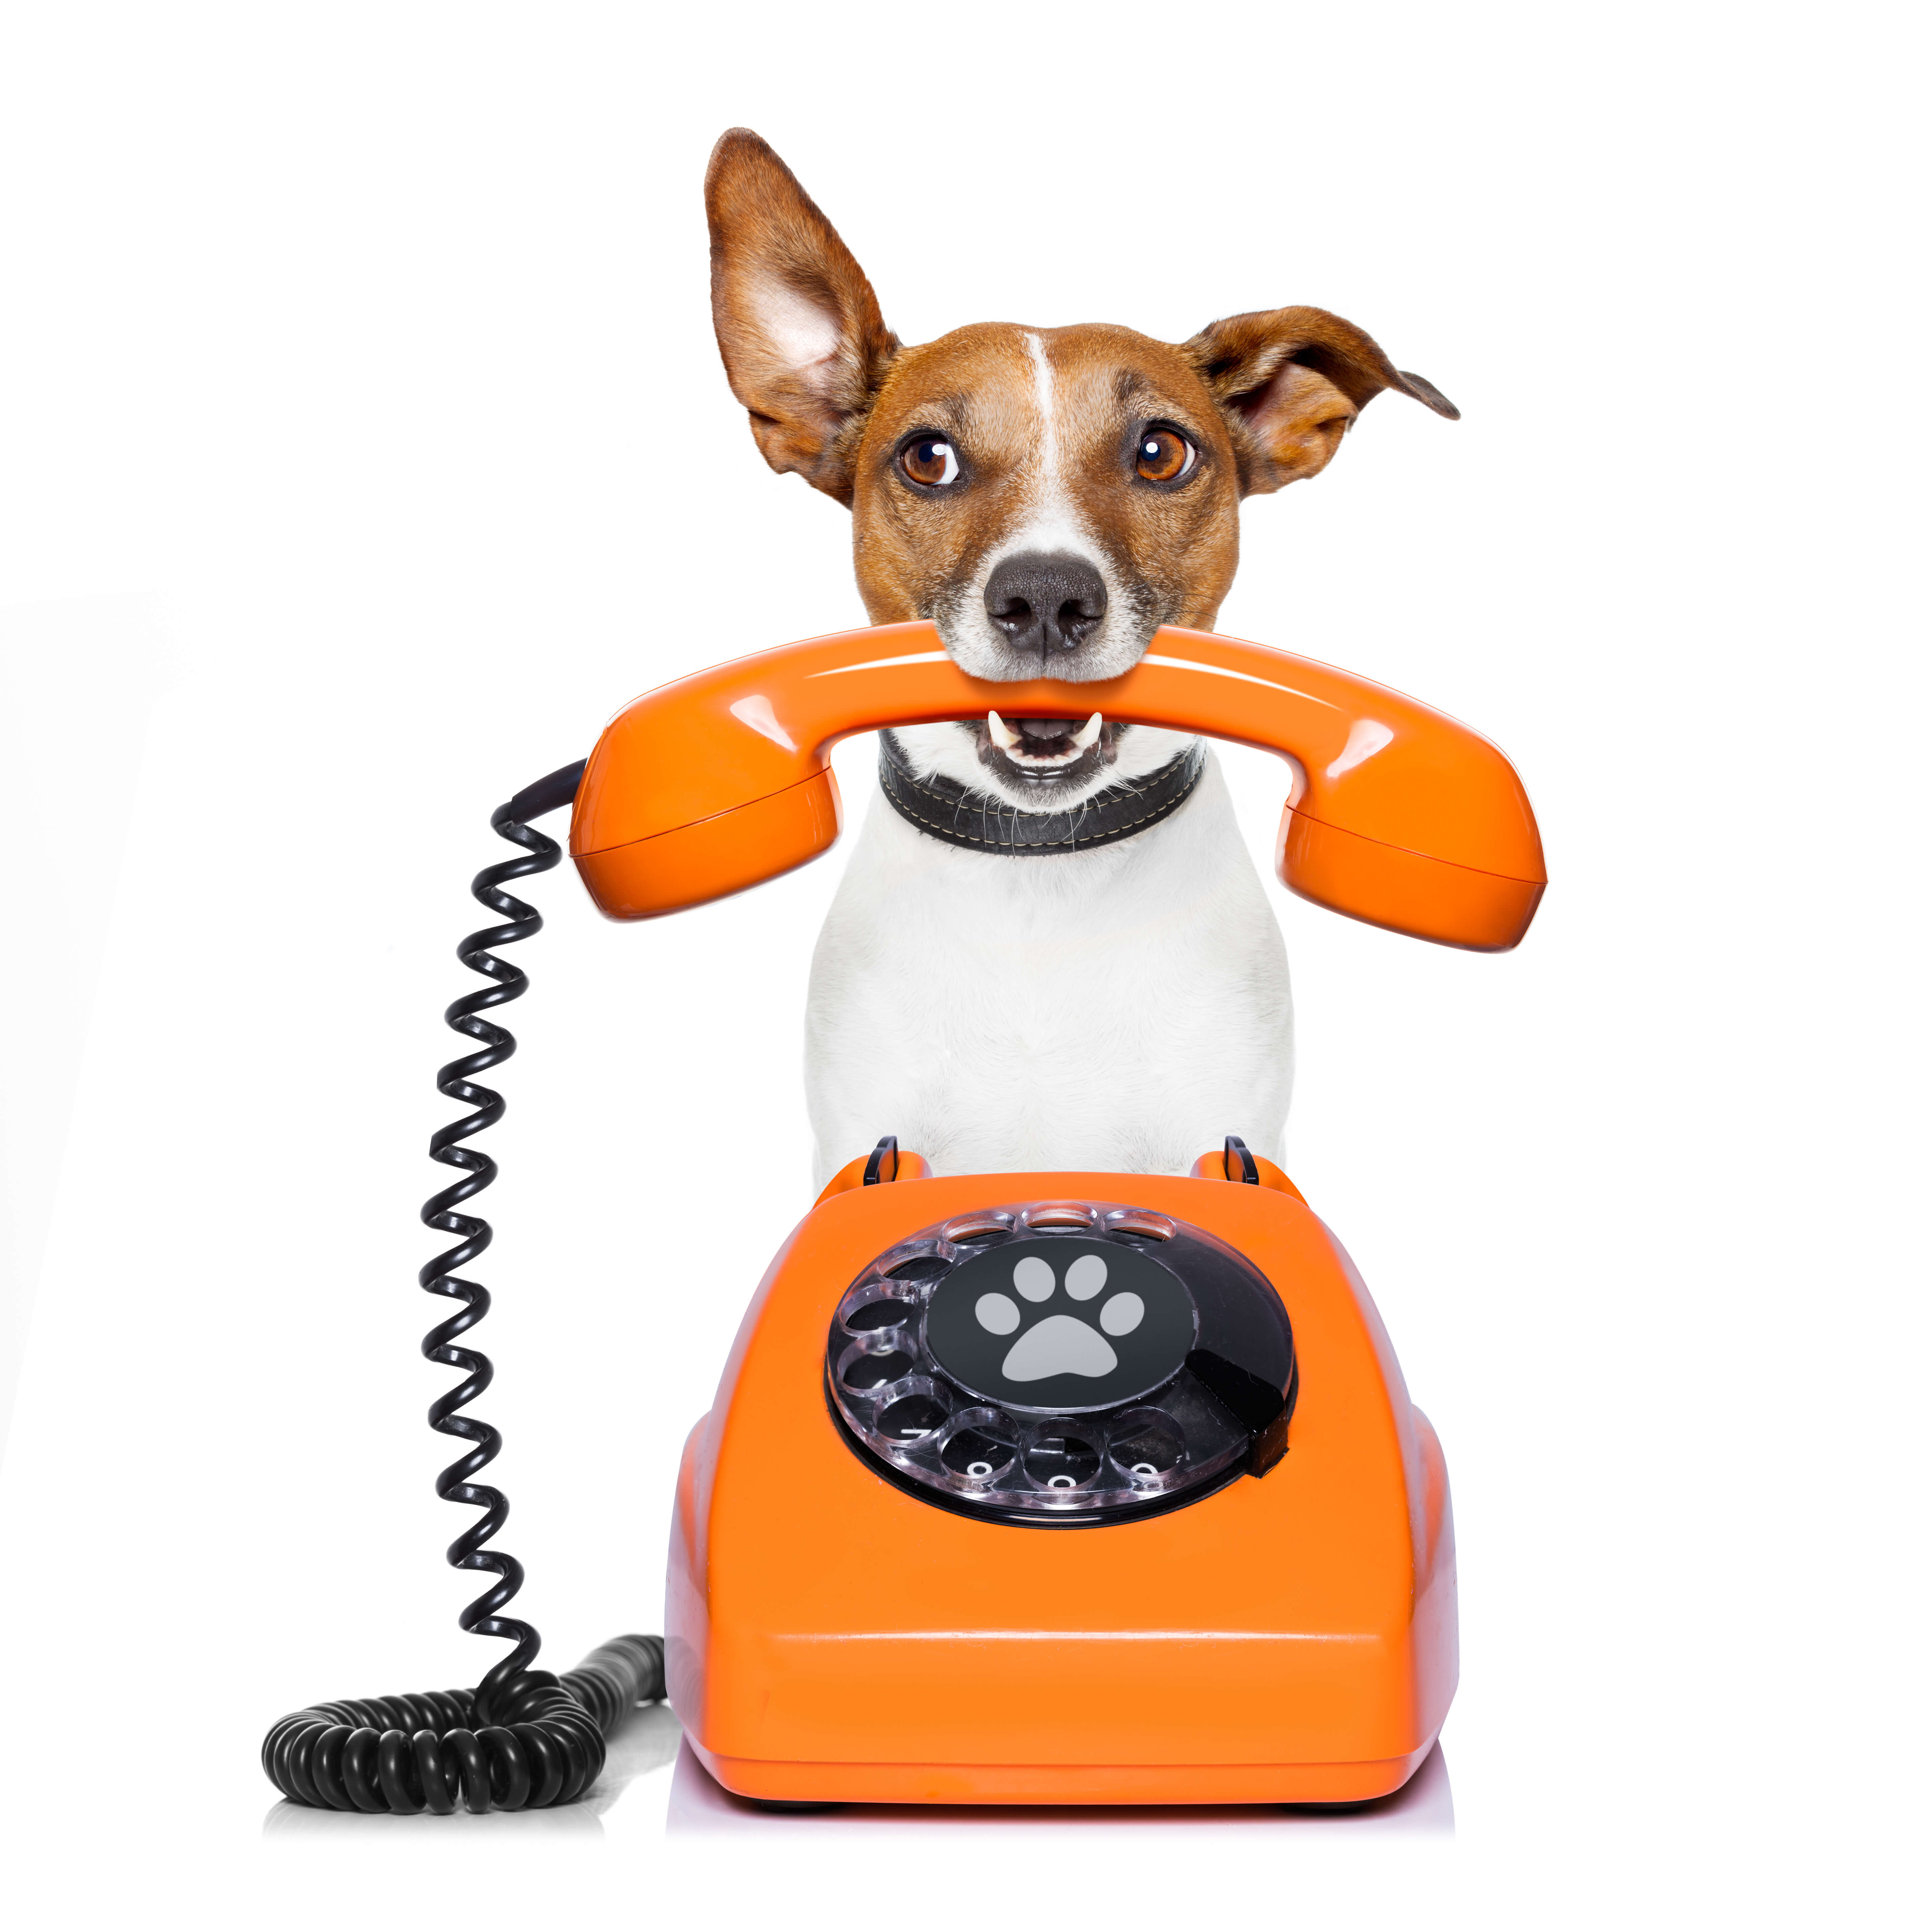 Jack Russell holding phone wanting you to give us a call!